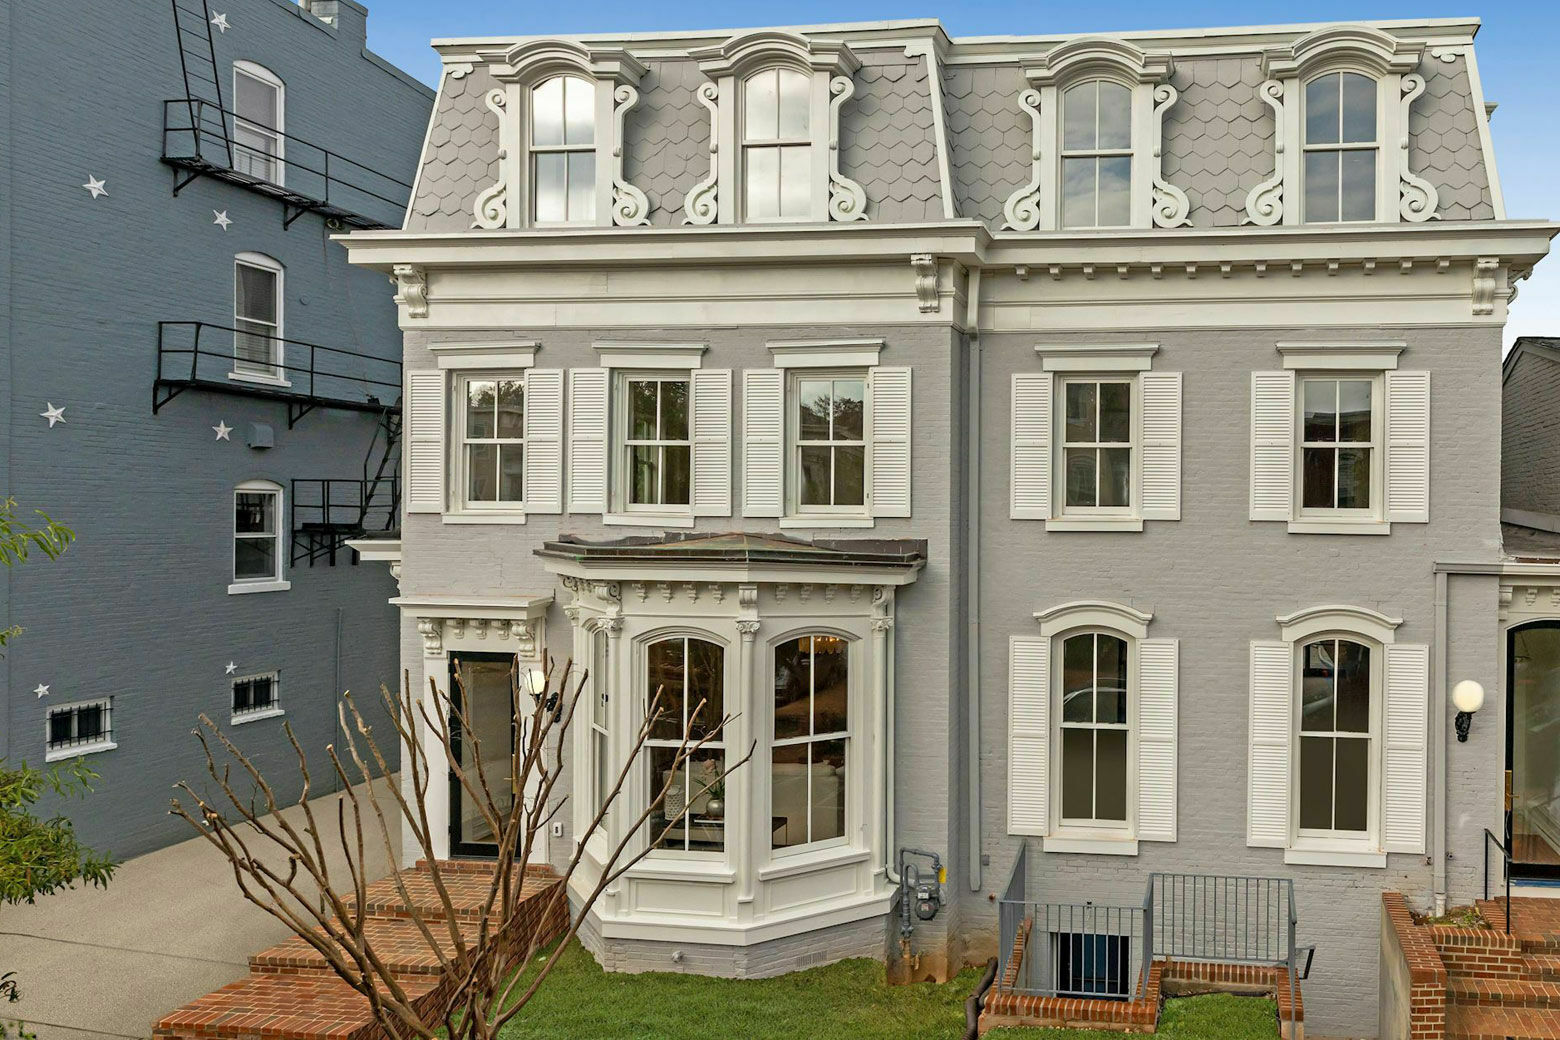 The former residence of abolitionist Frederick Douglass set the Capitol Hill record for highest sales price for a home when it was purchased in 2021.